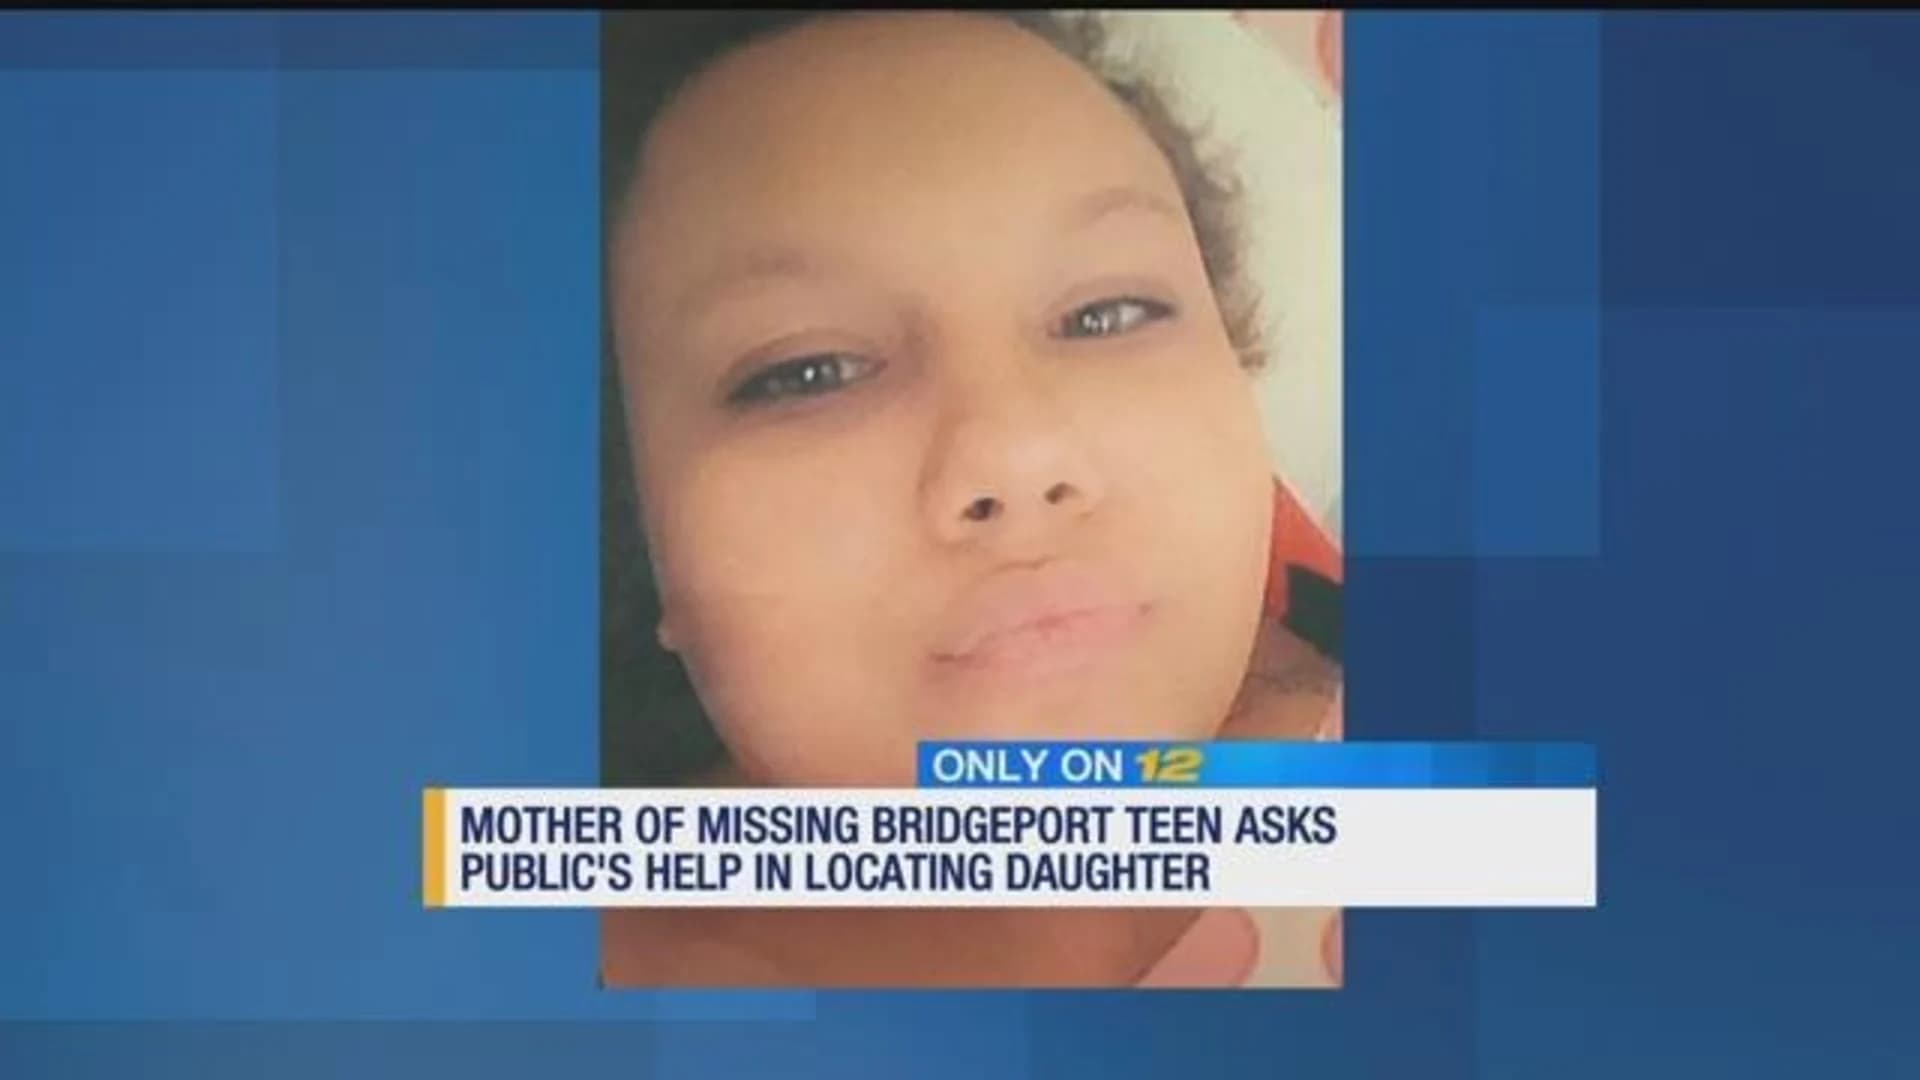 Search continues for missing teen with special needs